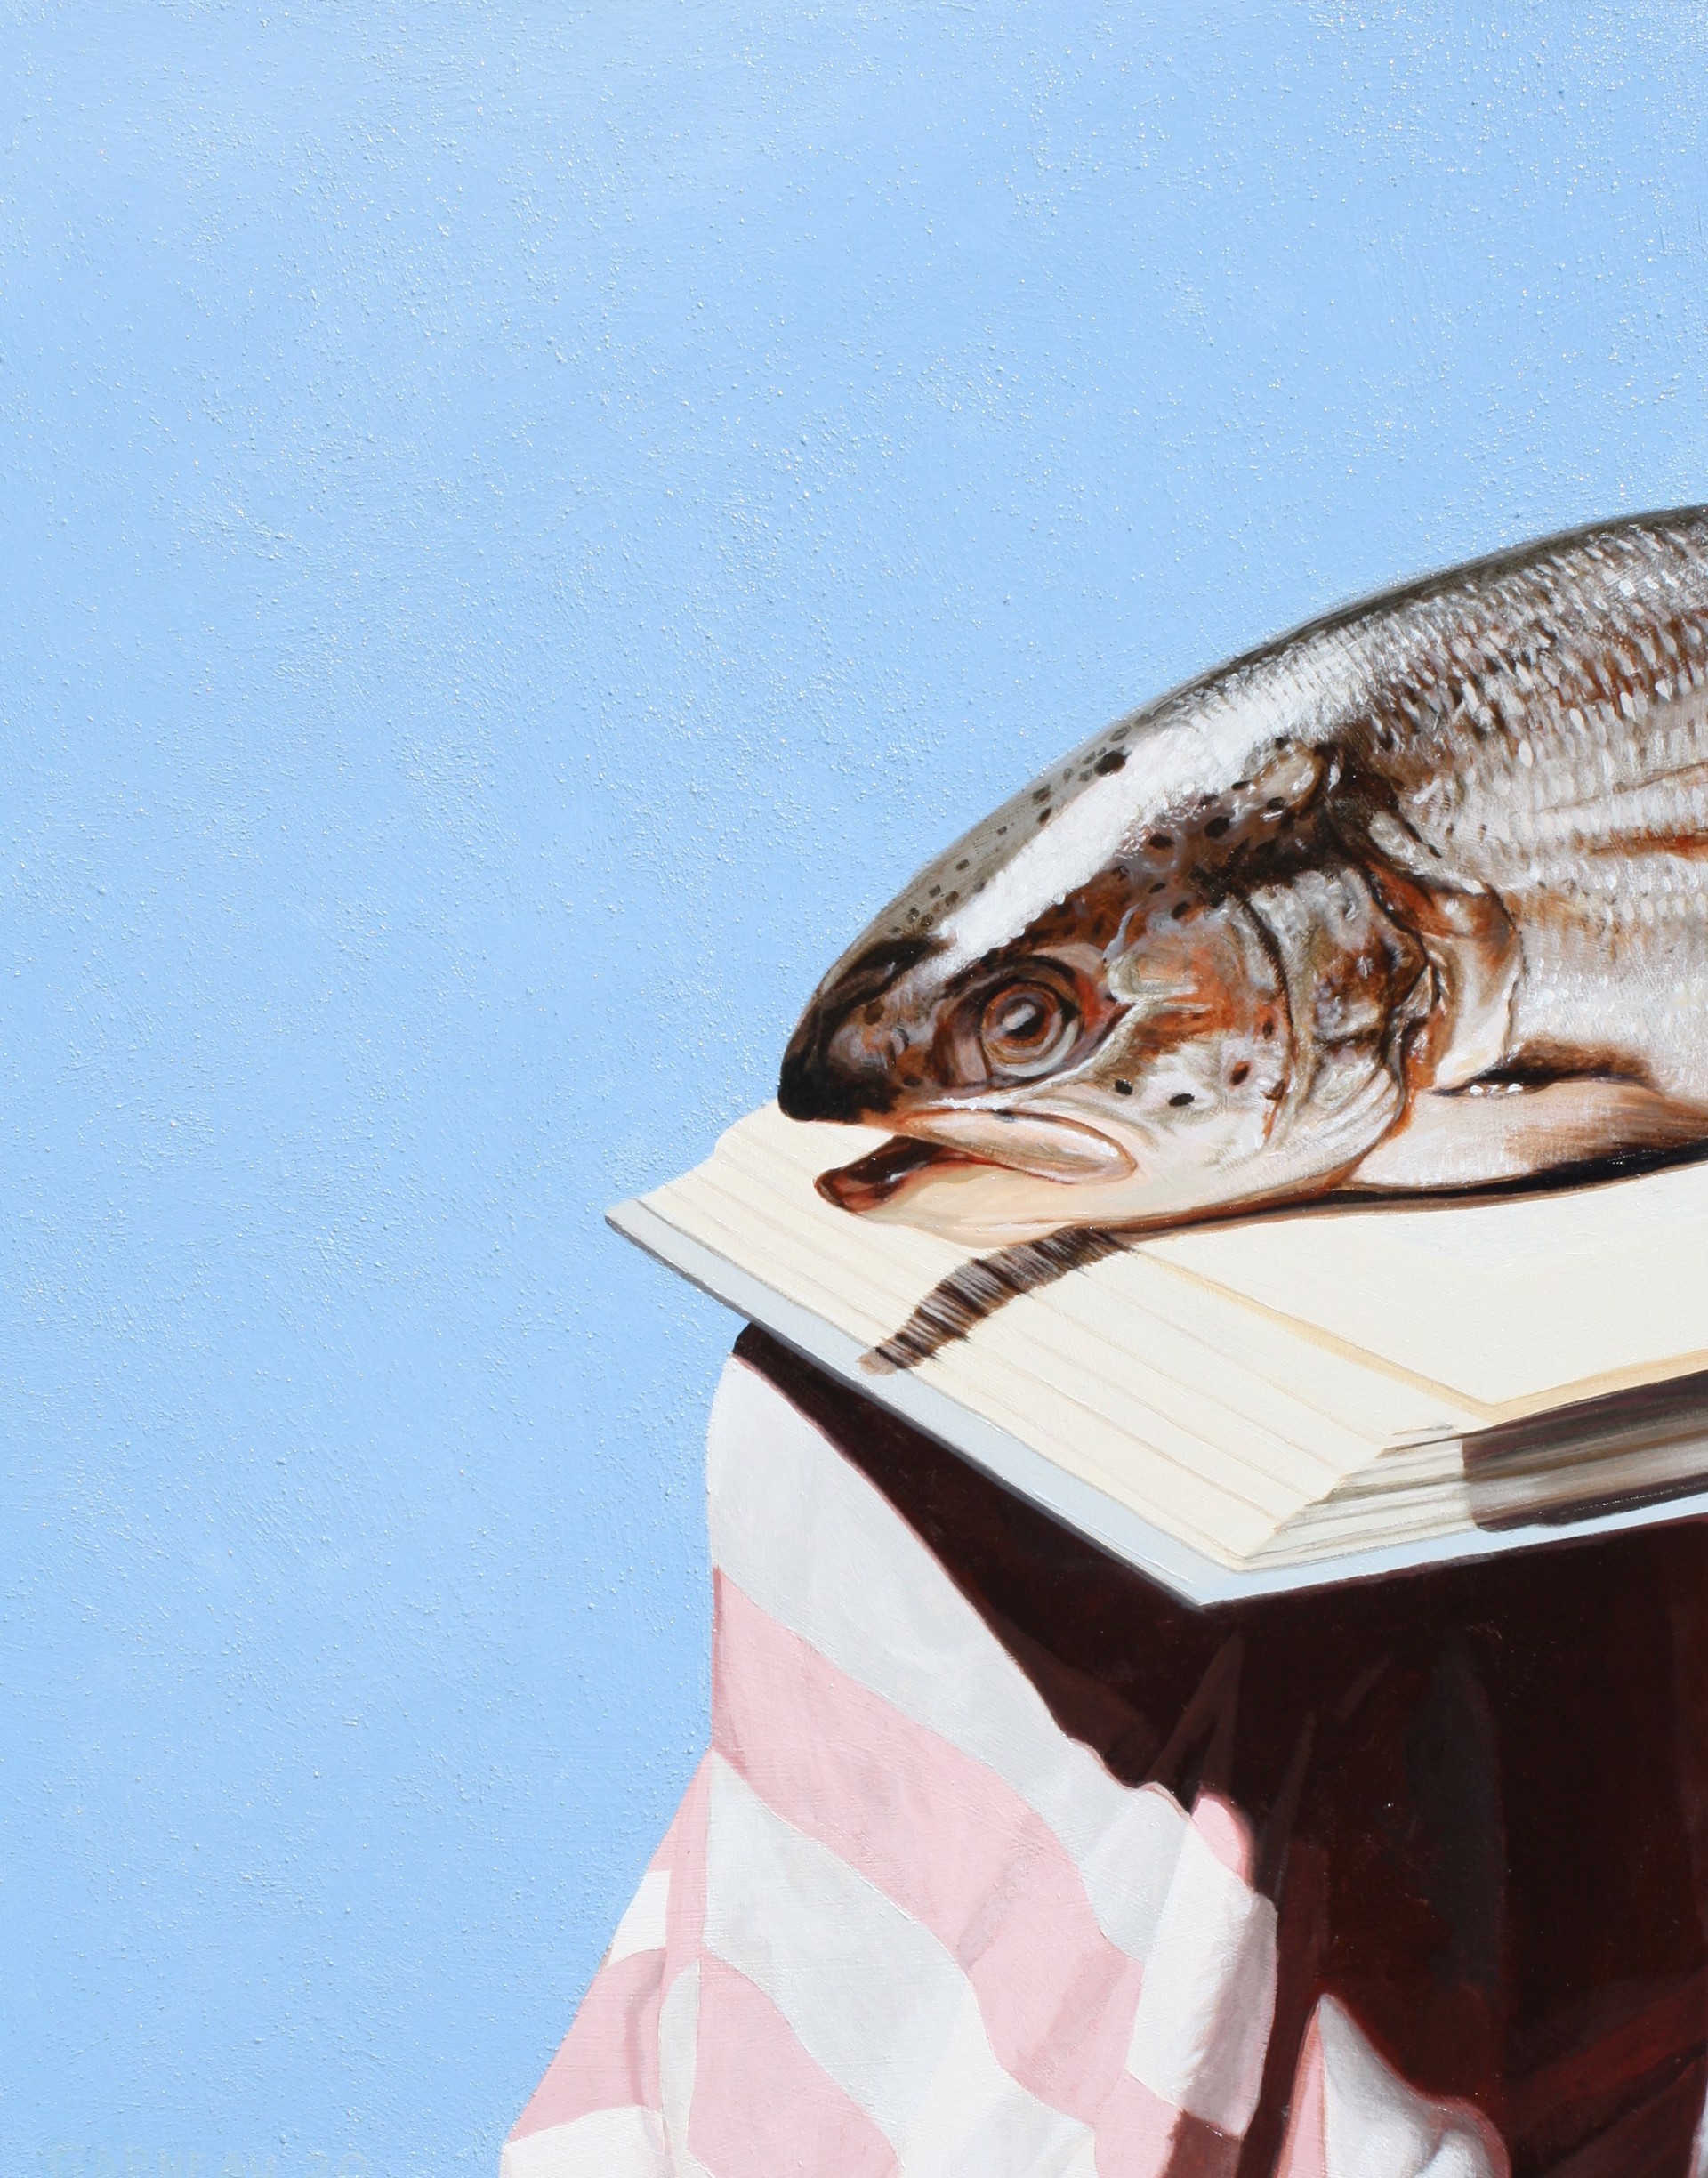 Non-Metaphorical Still Life (with Trout Head) by David Garneau